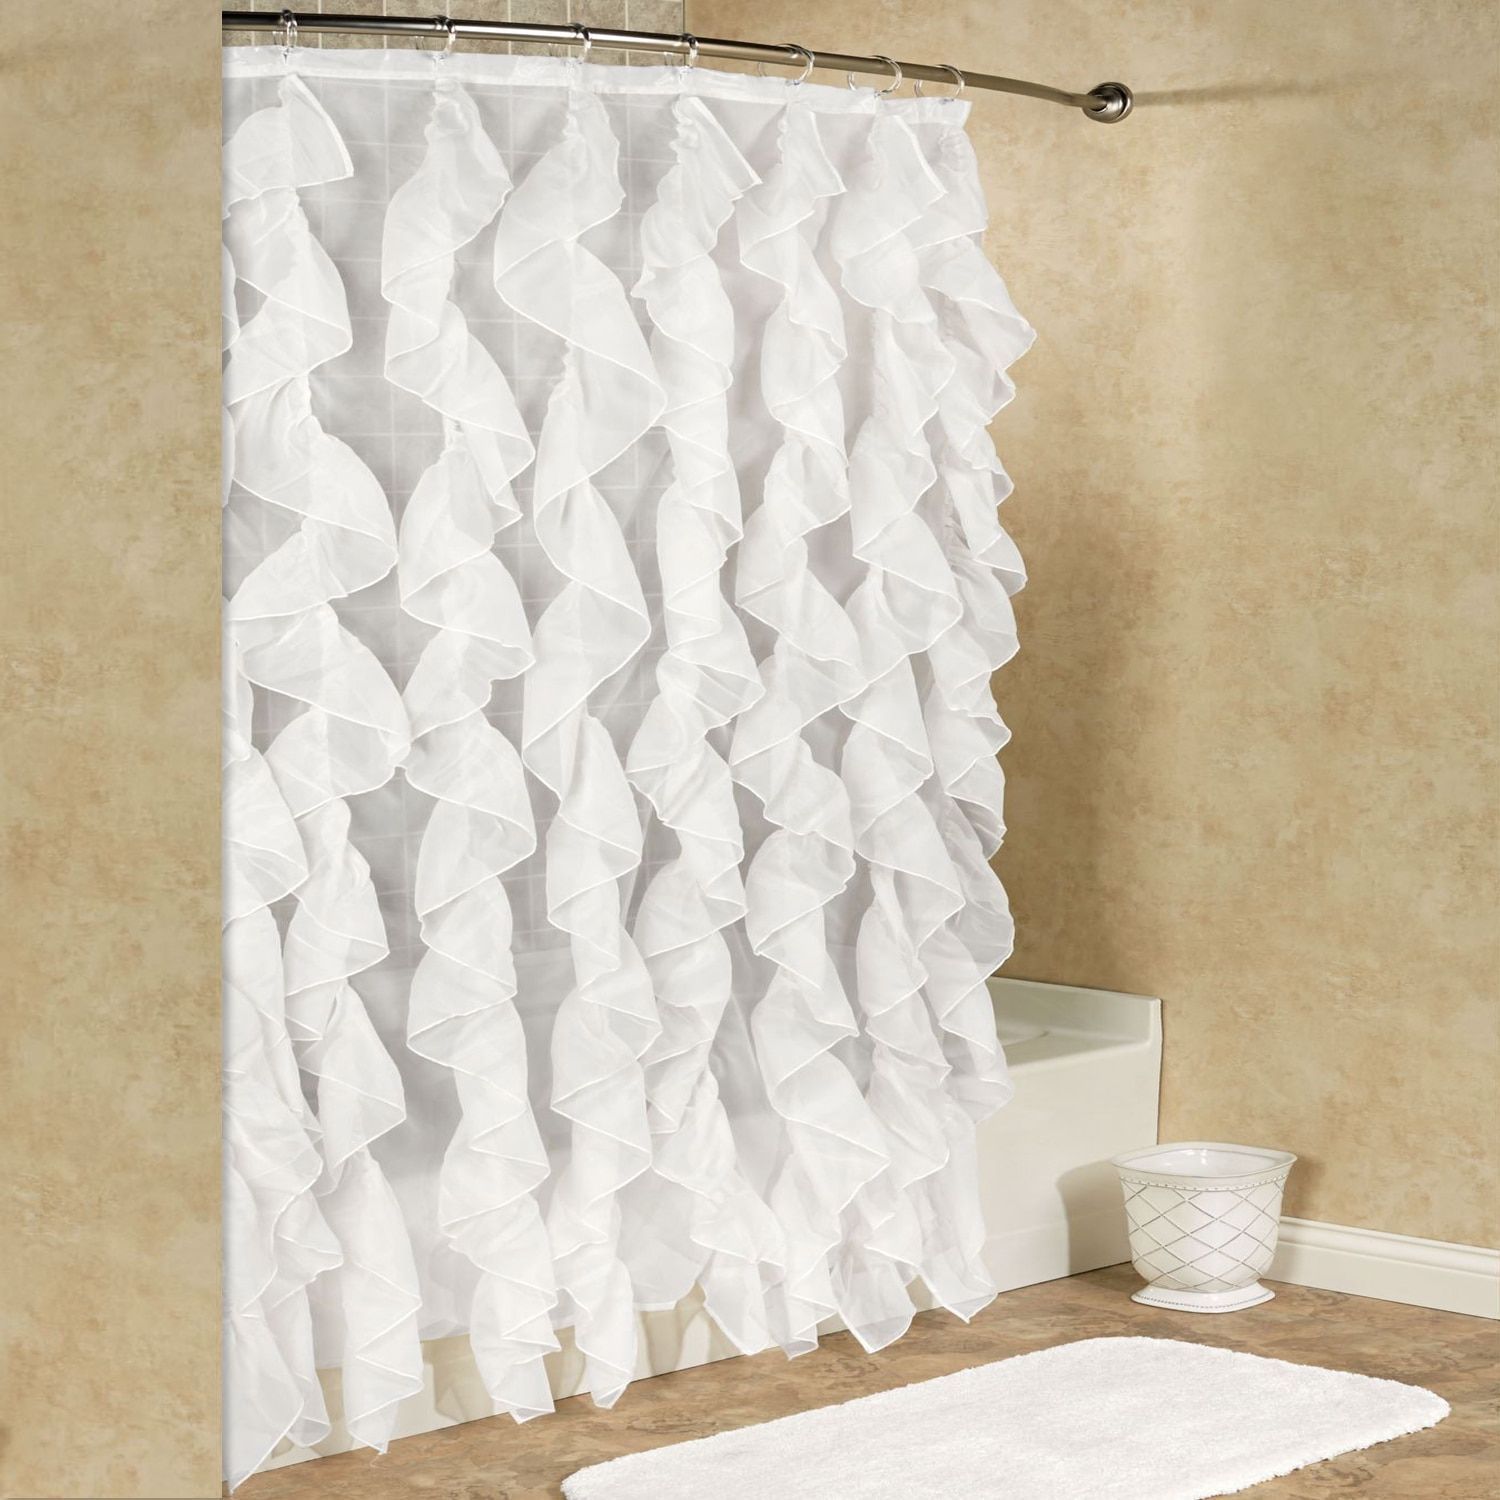 Chic Sheer Voile Vertical Waterfall Ruffled Shower Curtain Pertaining To Vertical Ruffled Waterfall Valances And Curtain Tiers (View 19 of 20)